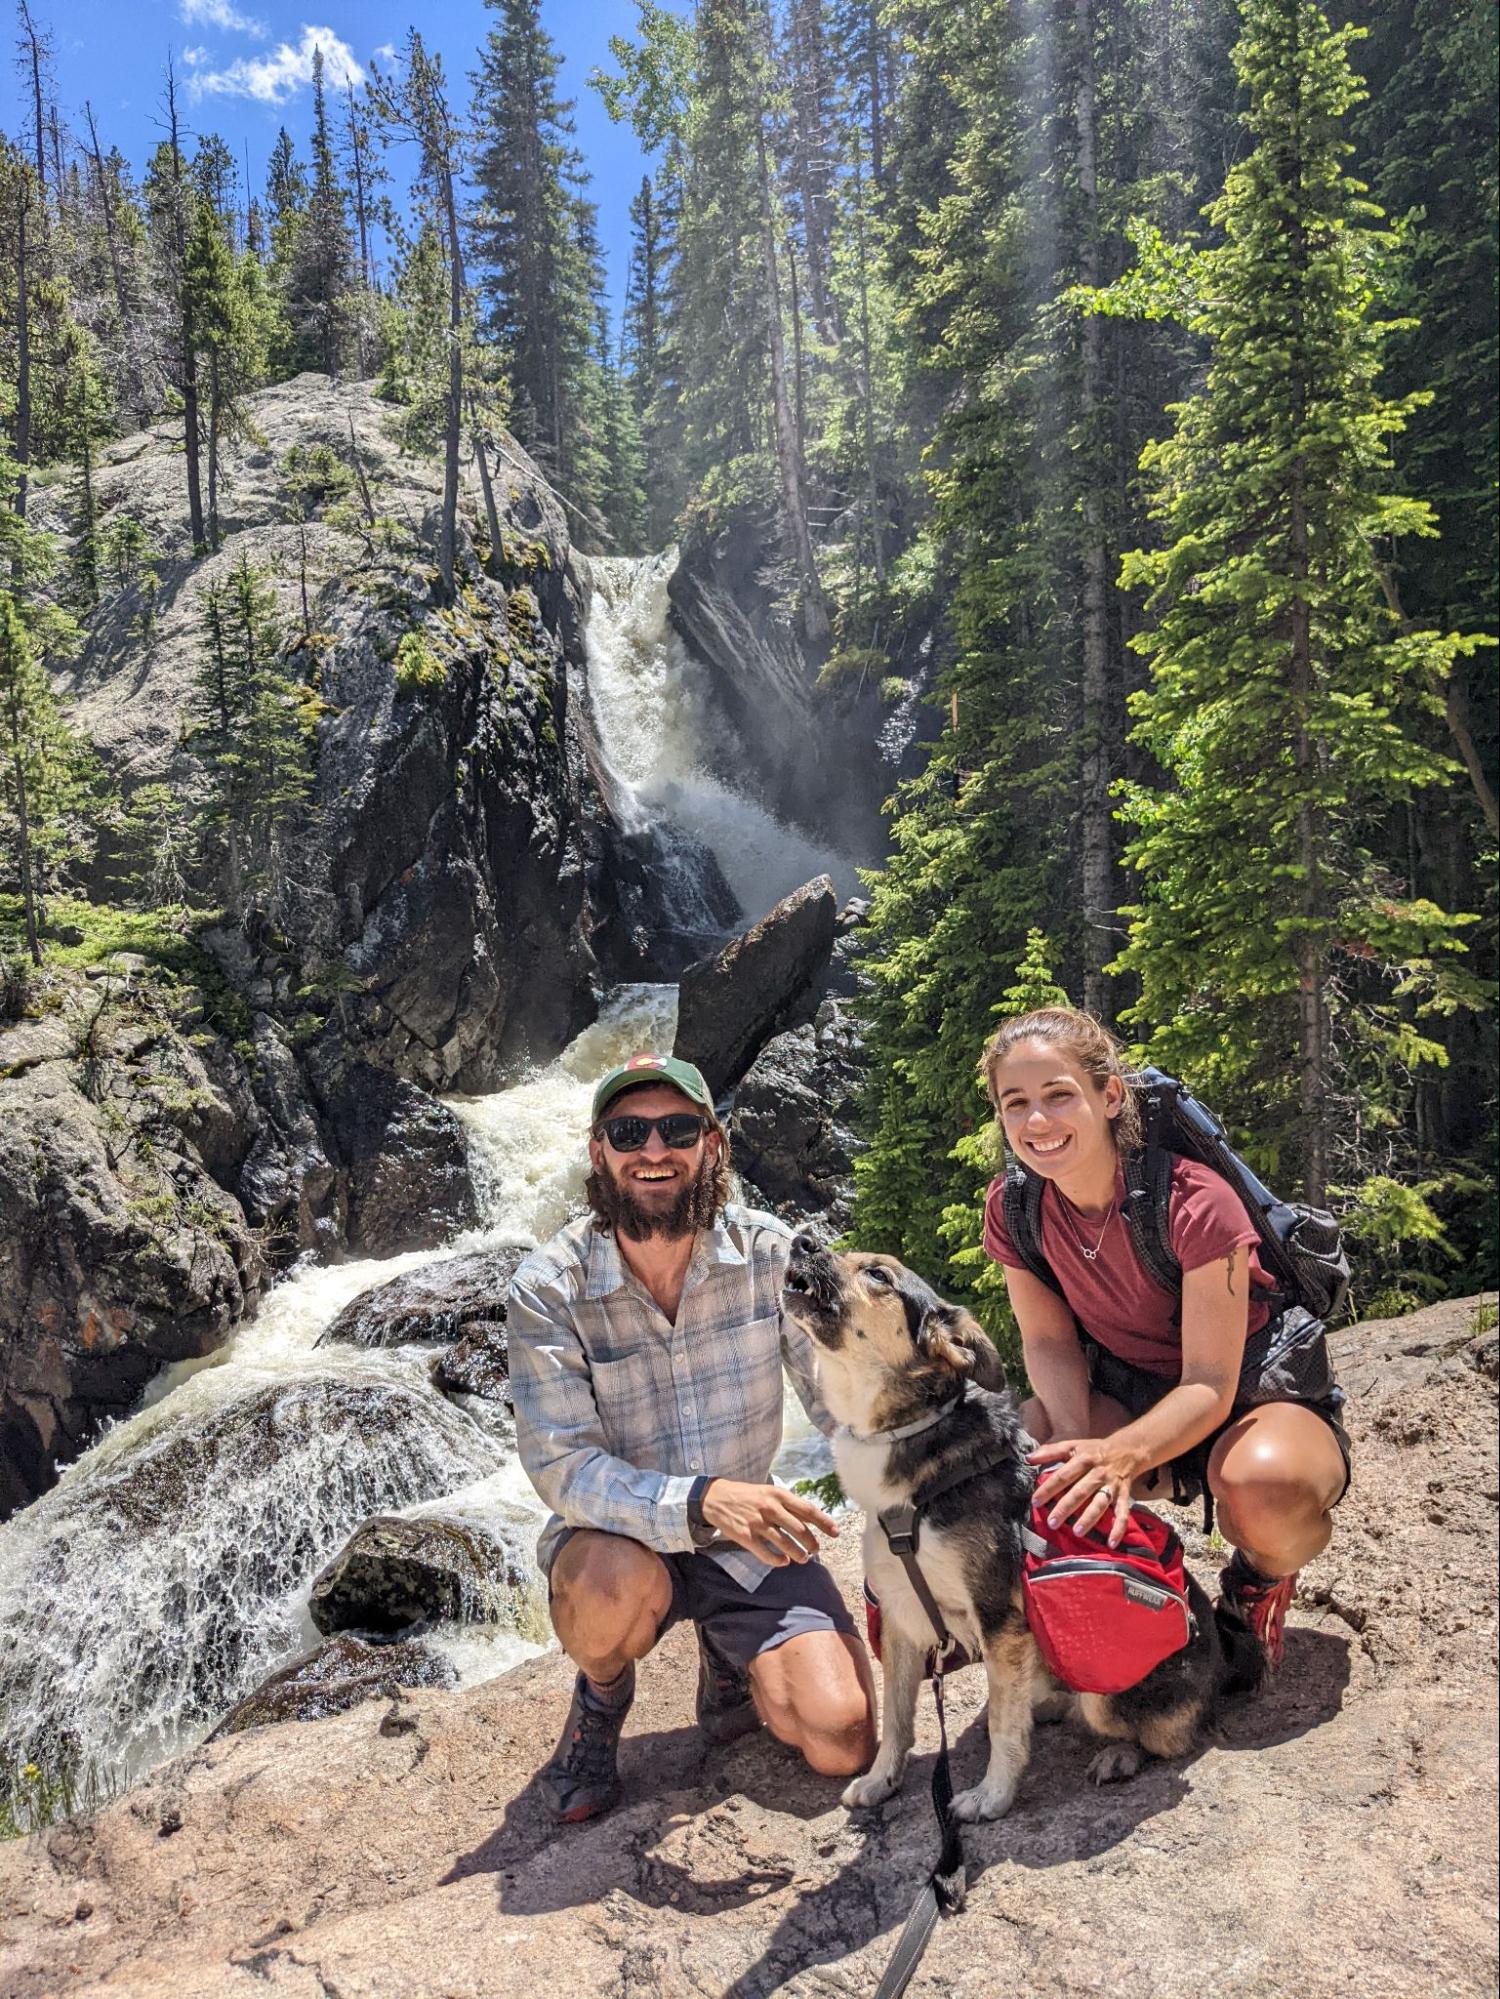 a man and a woman pose with a dog in front of a waterfall